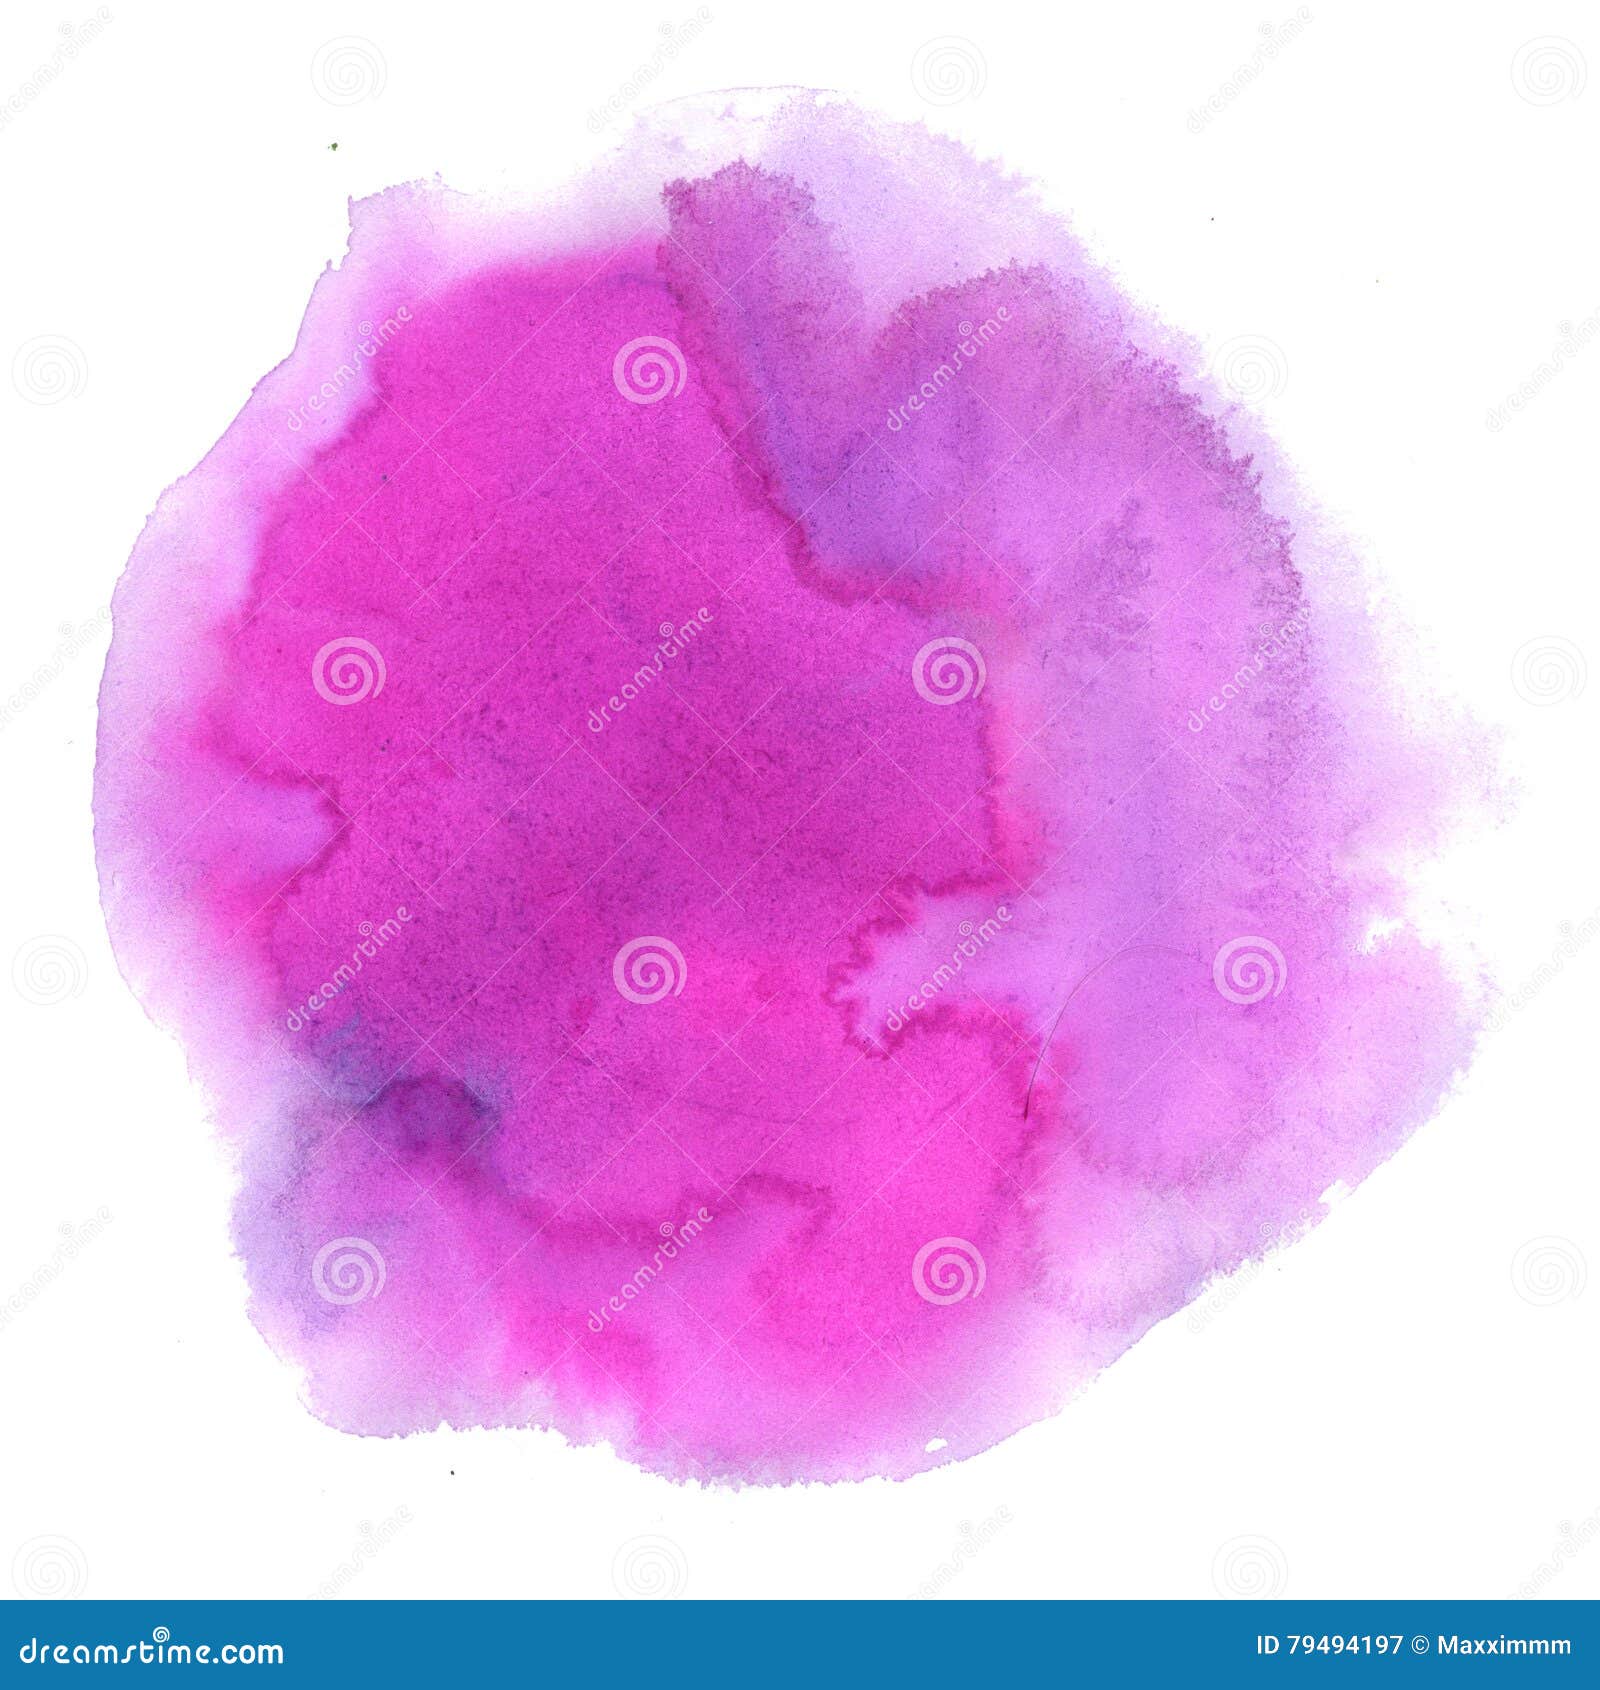 Abstract Purple, and blue watercolor splash stain ink leak blot